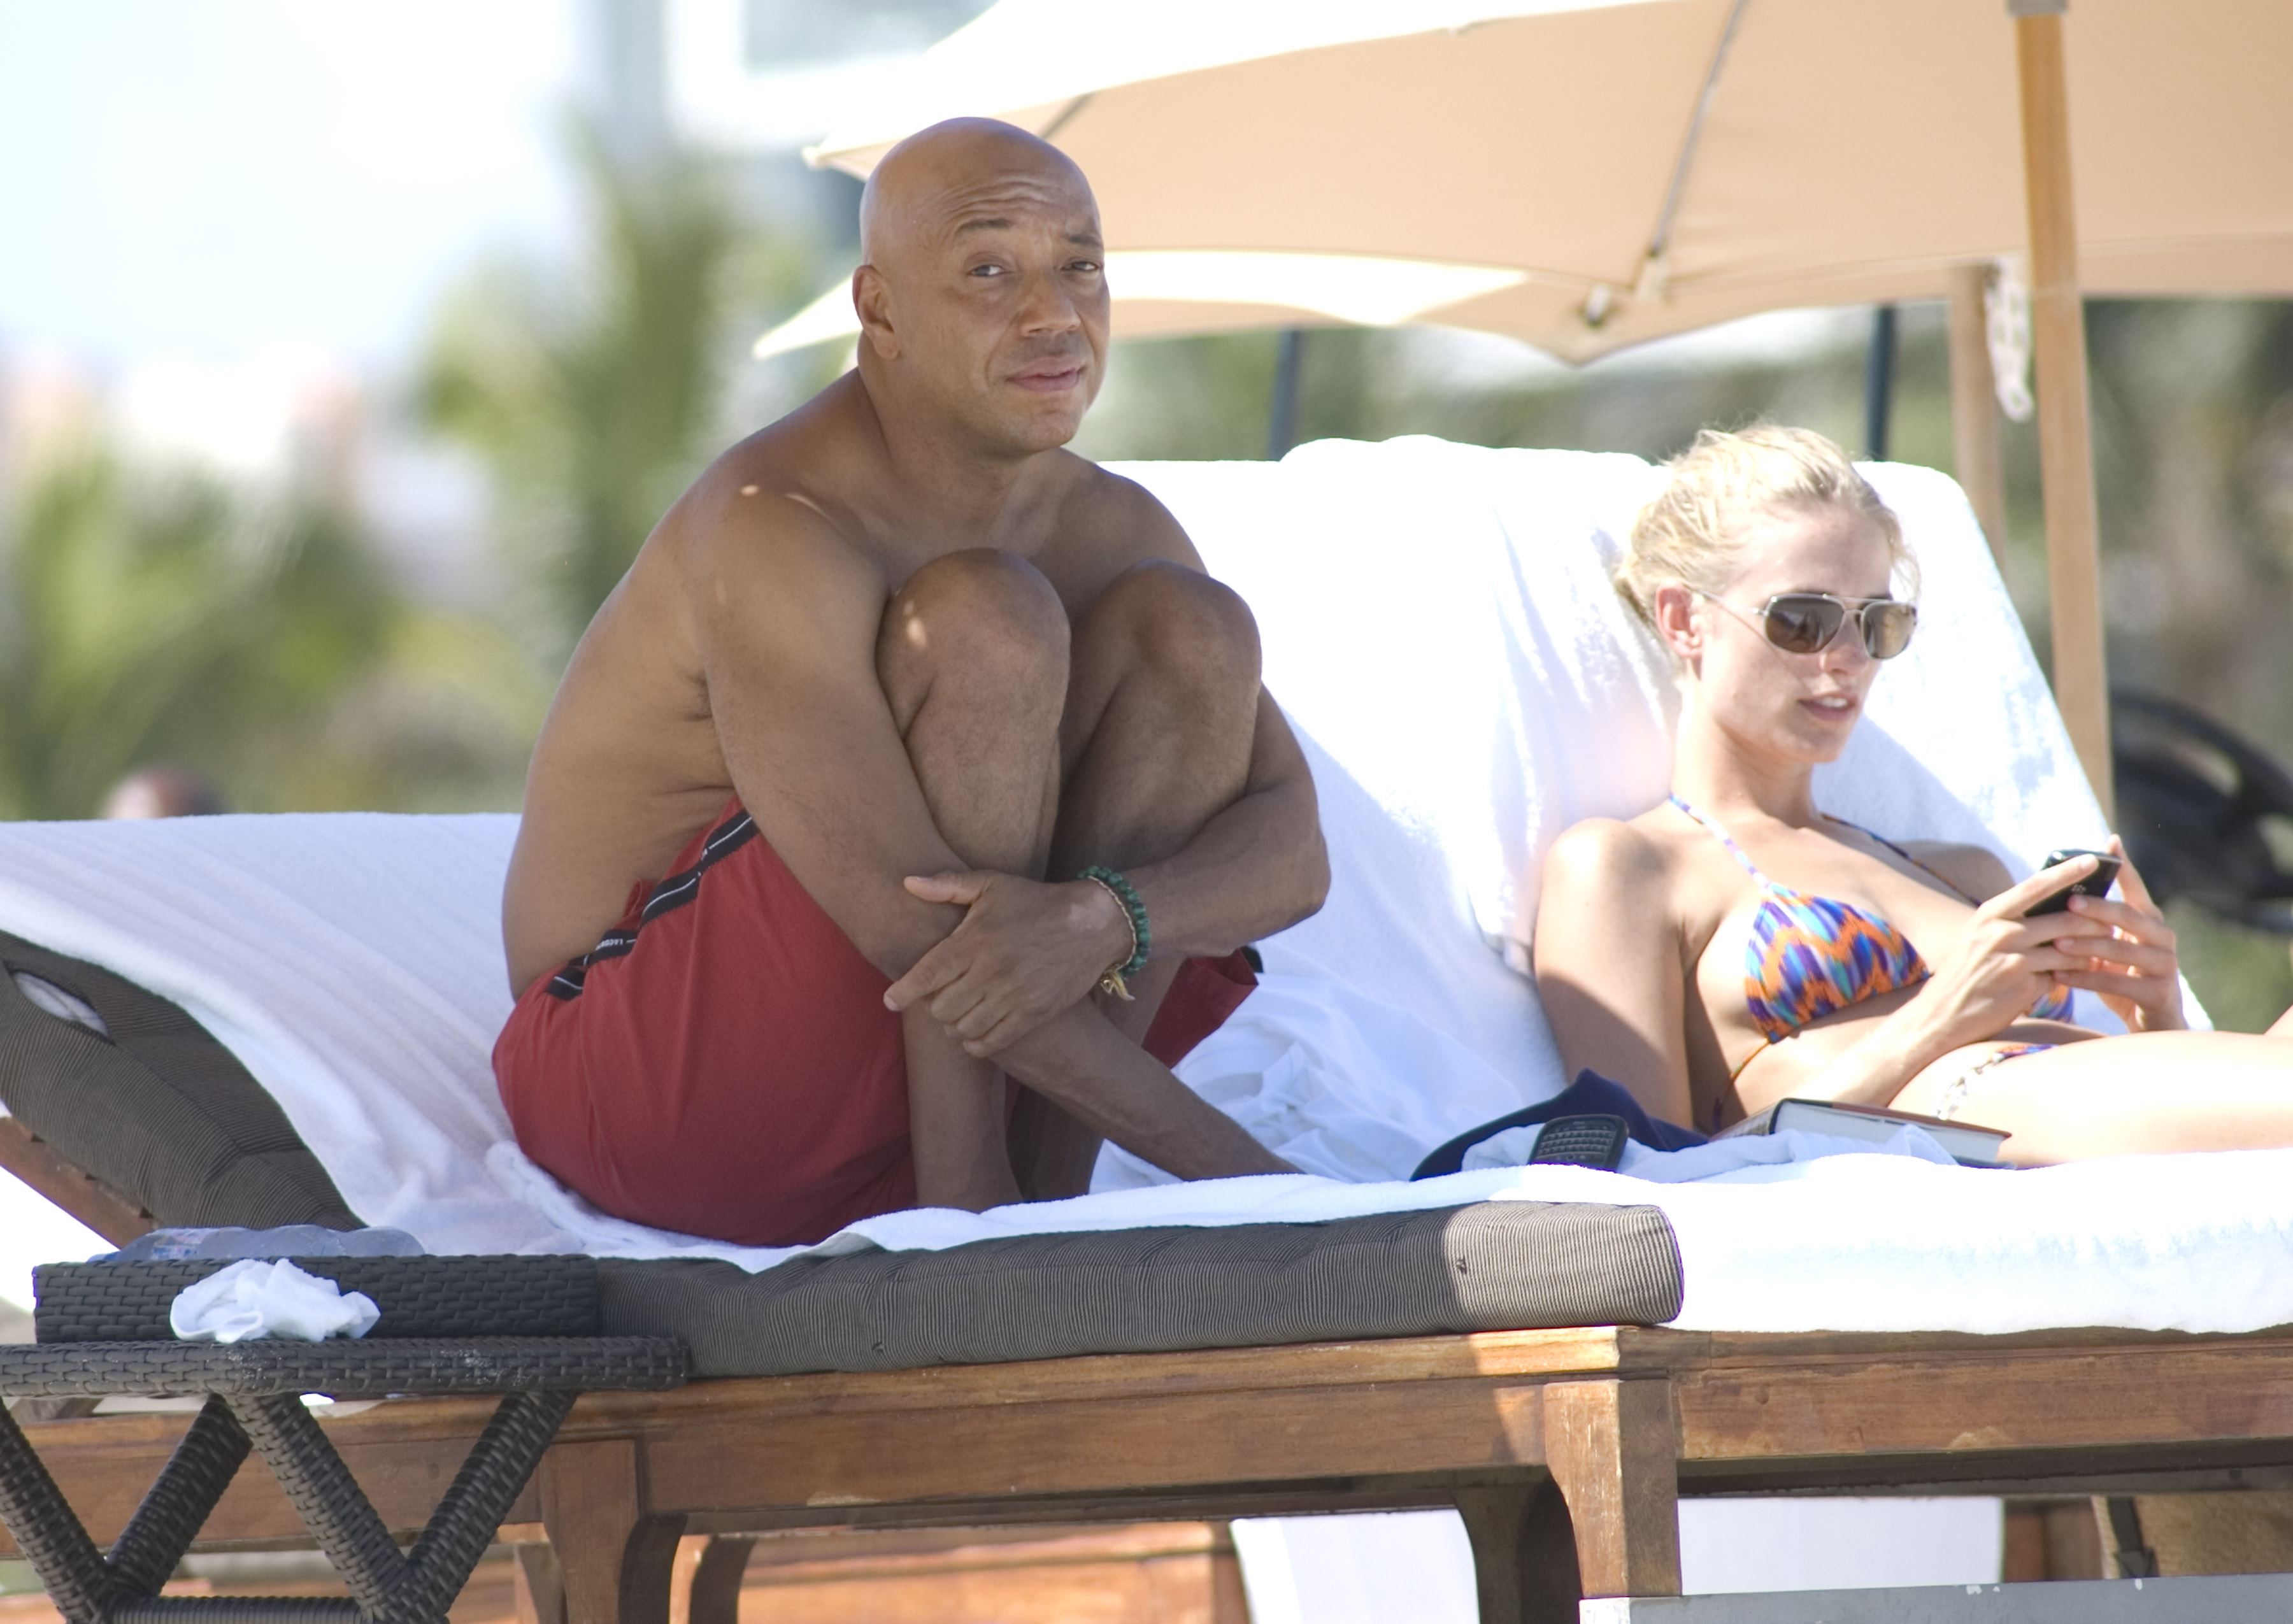 Russell Simmons does yoga and goes for a swim with his girlfriend Julie Henderson. He even takes the time to help out a homeless person with a little cash assistance in Miami Beach, Florida.